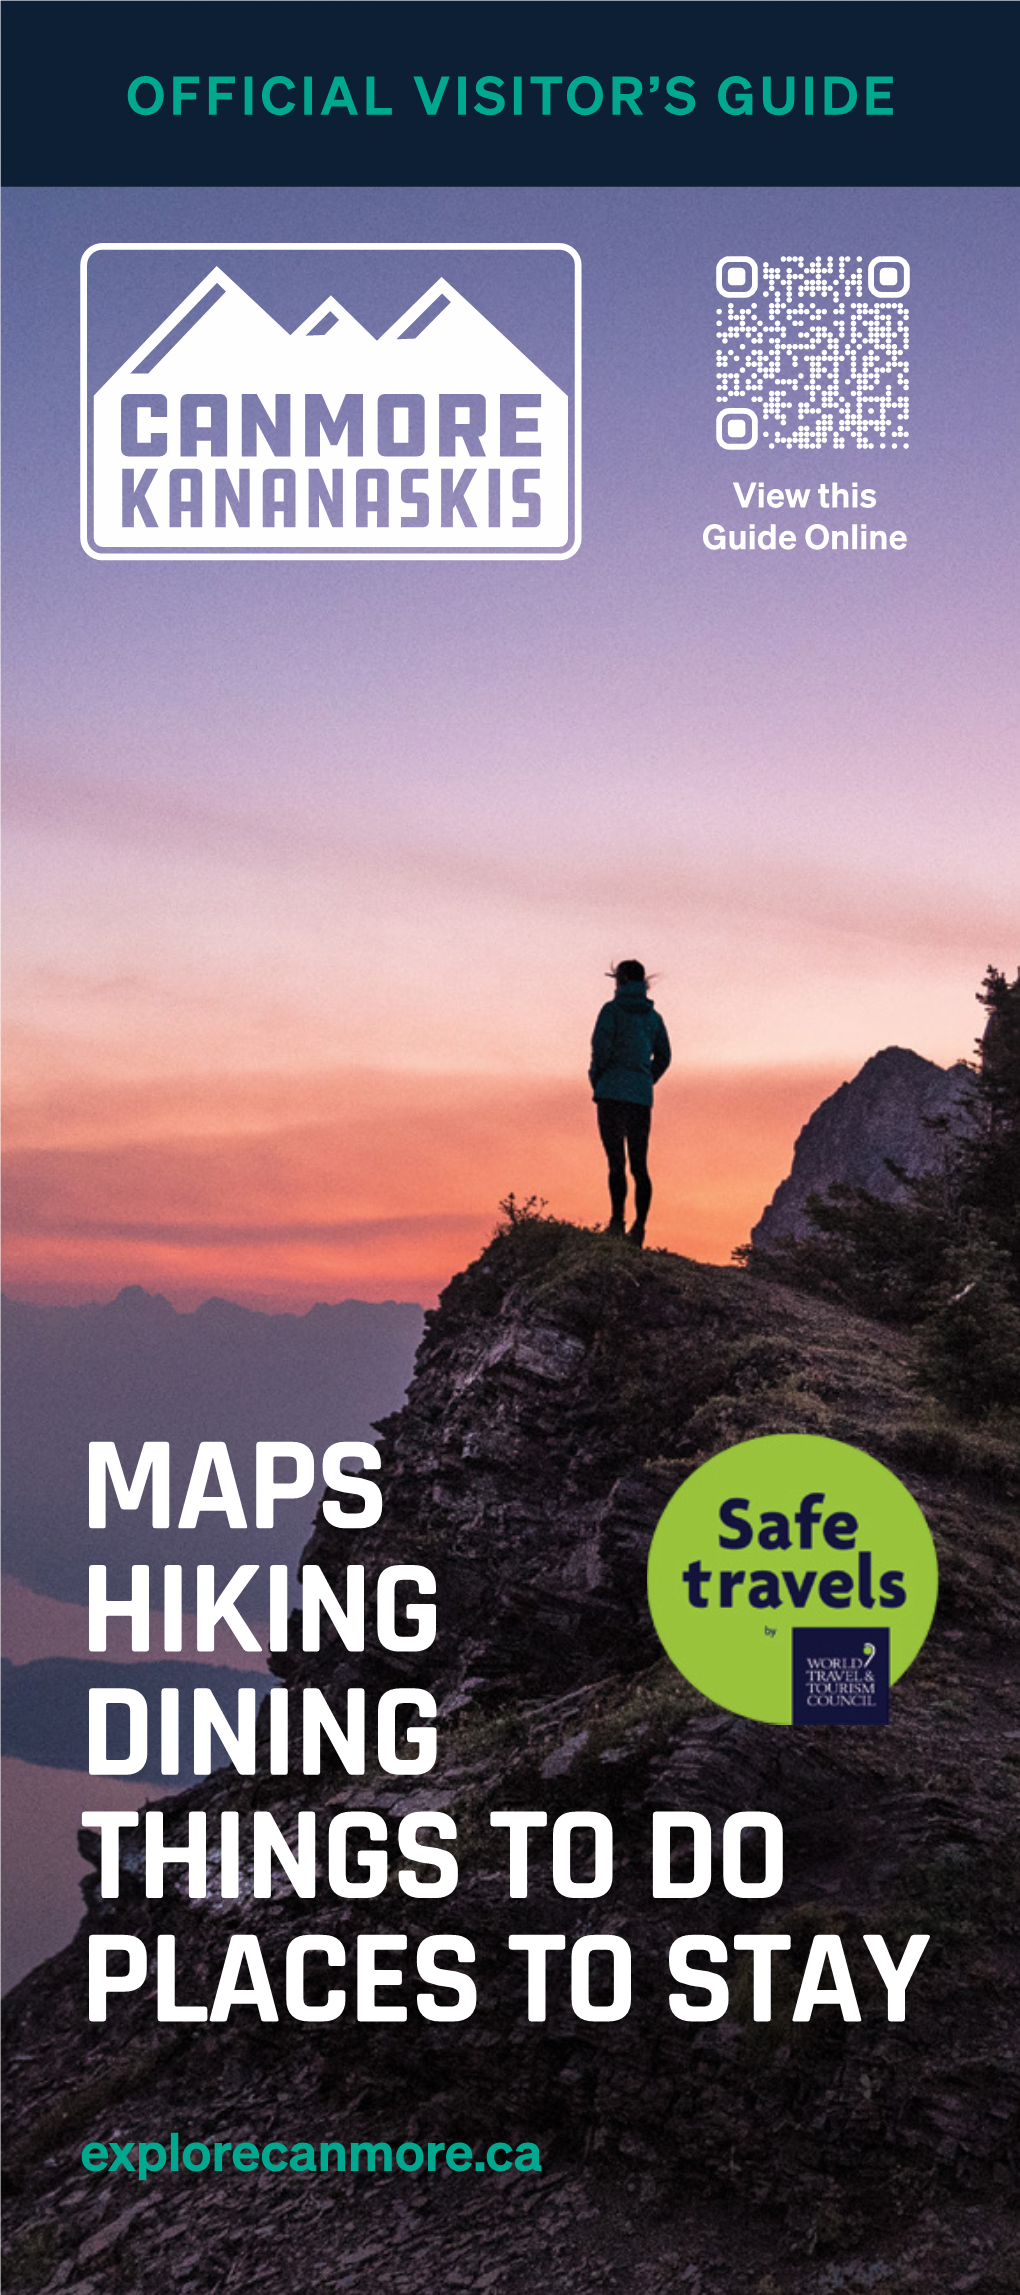 MAPS HIKING DINING THINGS to DO PLACES to STAY Explorecanmore.Ca 1, 2 & 3 BEDROOM VACATION CONDO RENTALS Springcreekvacations.Com • 403.678.5108